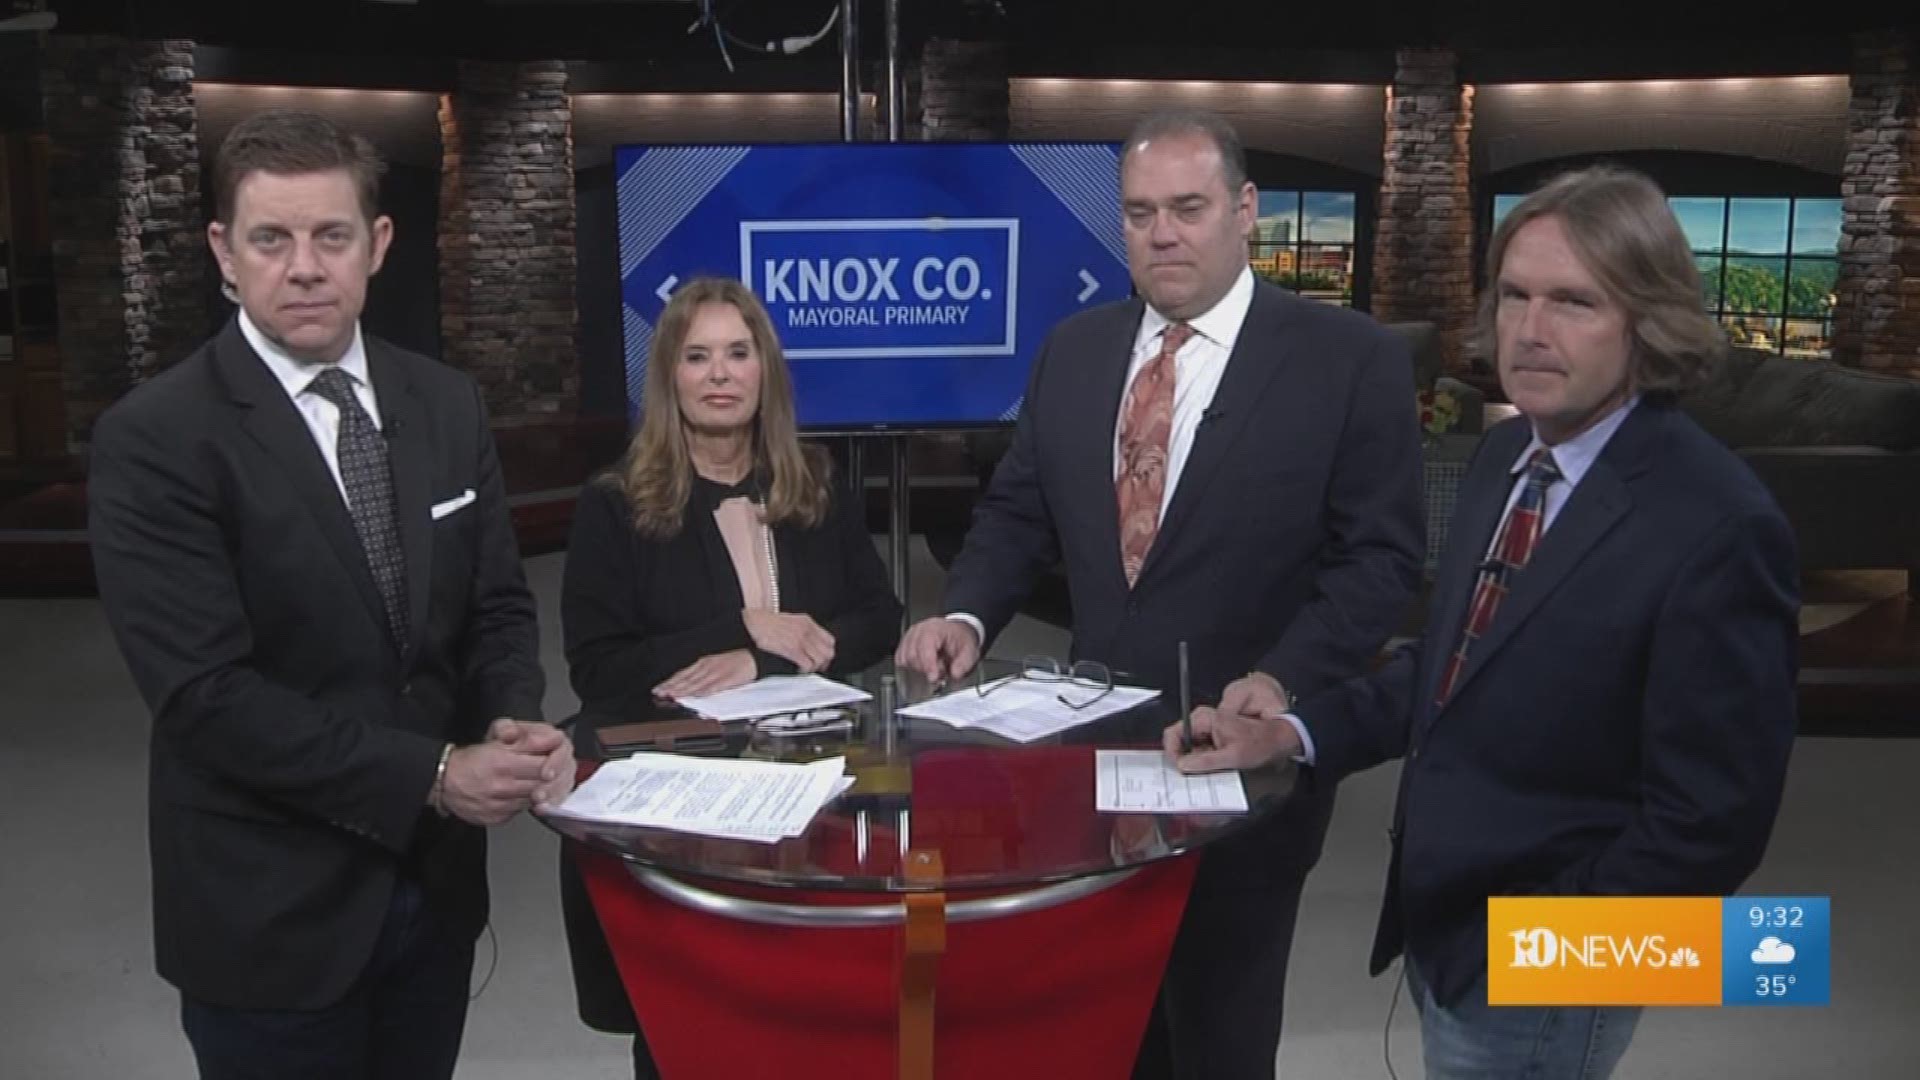 Inside Tennessee's regular panel discusses the April 5 Knox County mayoral debate presented by WBIR.